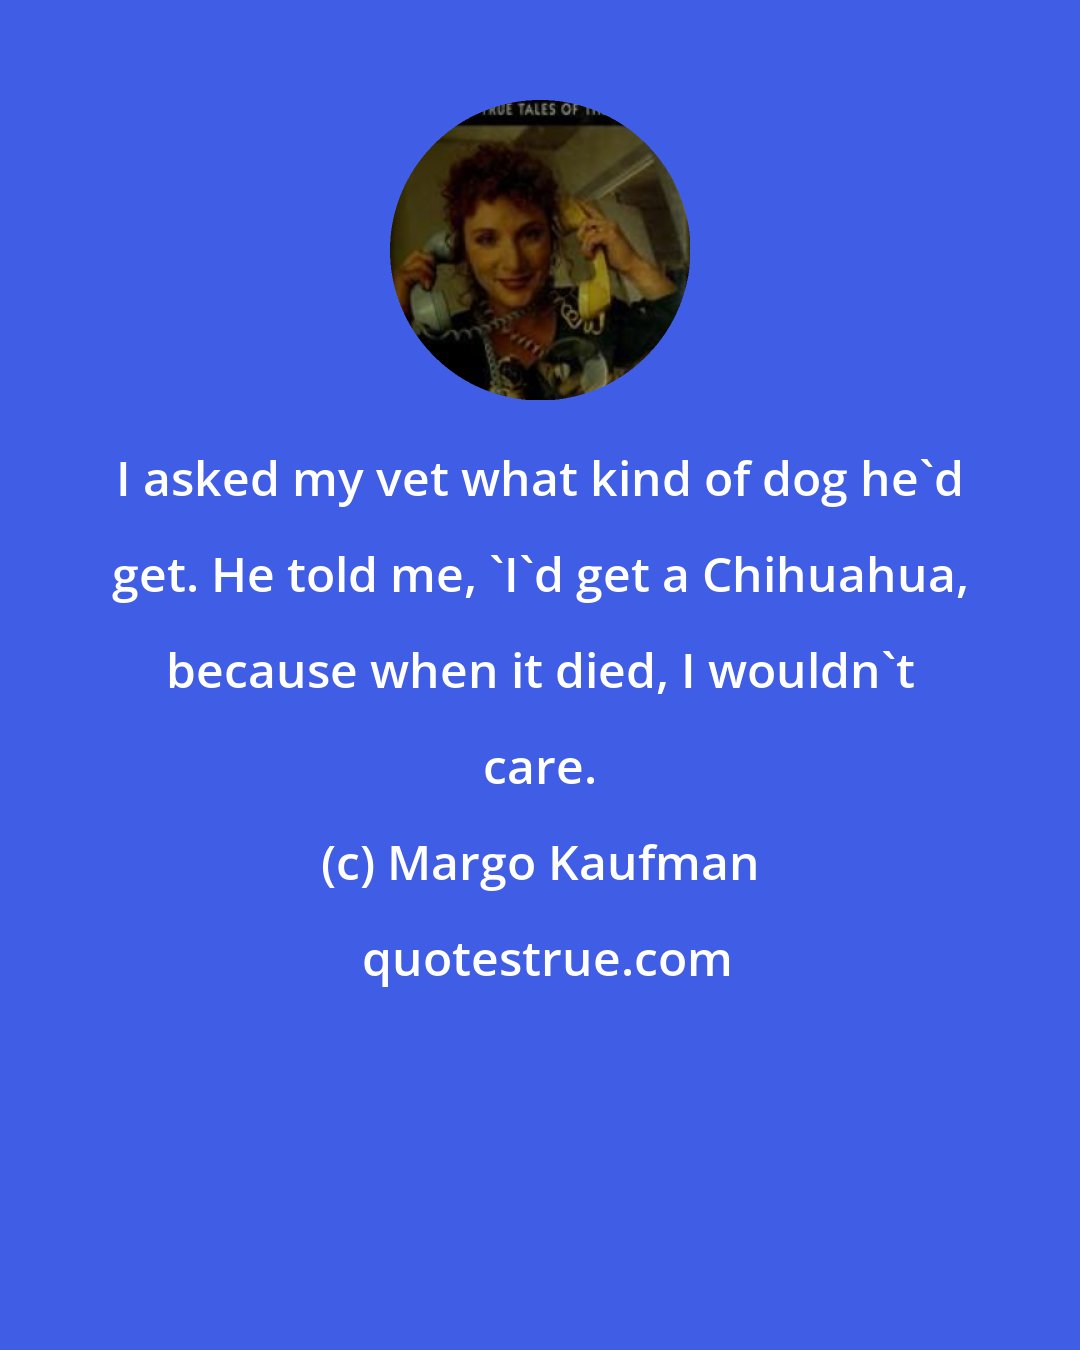 Margo Kaufman: I asked my vet what kind of dog he'd get. He told me, 'I'd get a Chihuahua, because when it died, I wouldn't care.